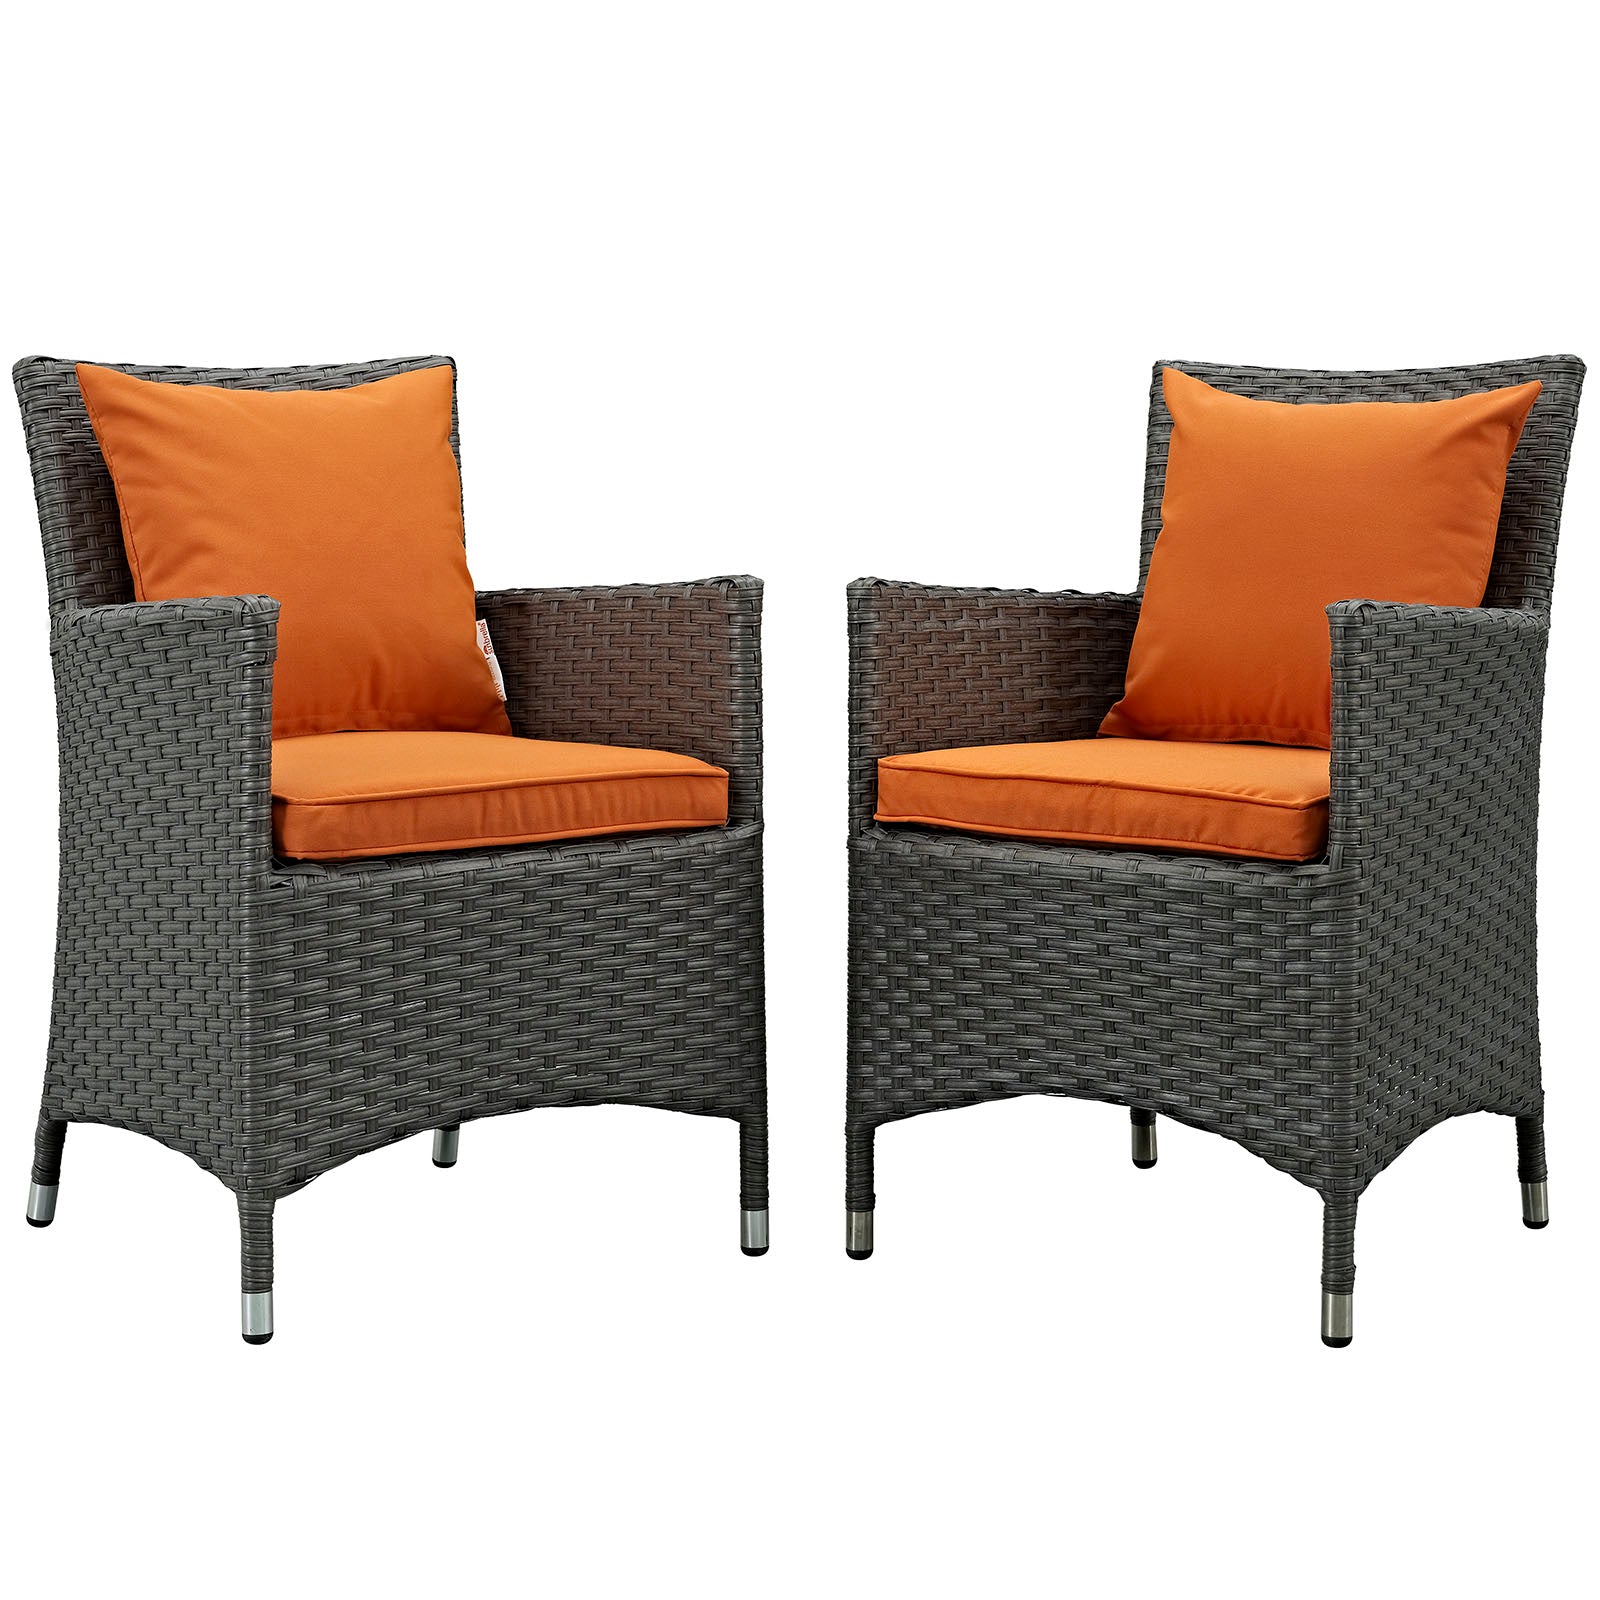 Sojourn 2 Piece Outdoor Patio Sunbrella® Dining Set - East Shore Modern Home Furnishings